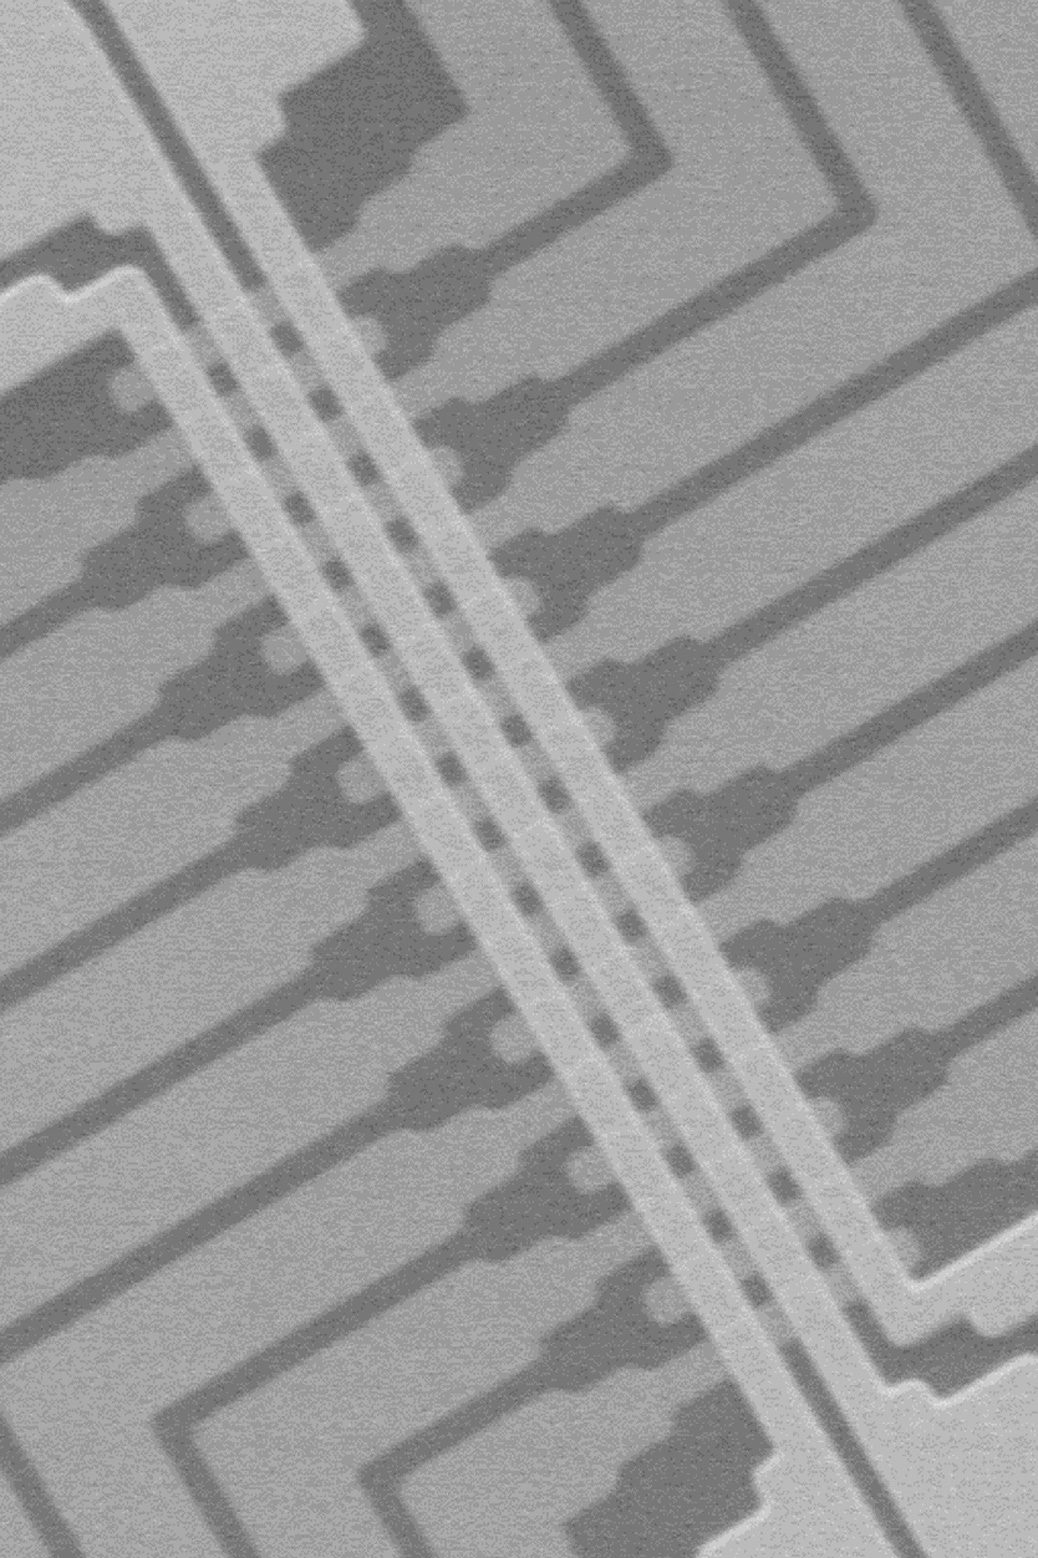 An electron microscope image of the memristor array.